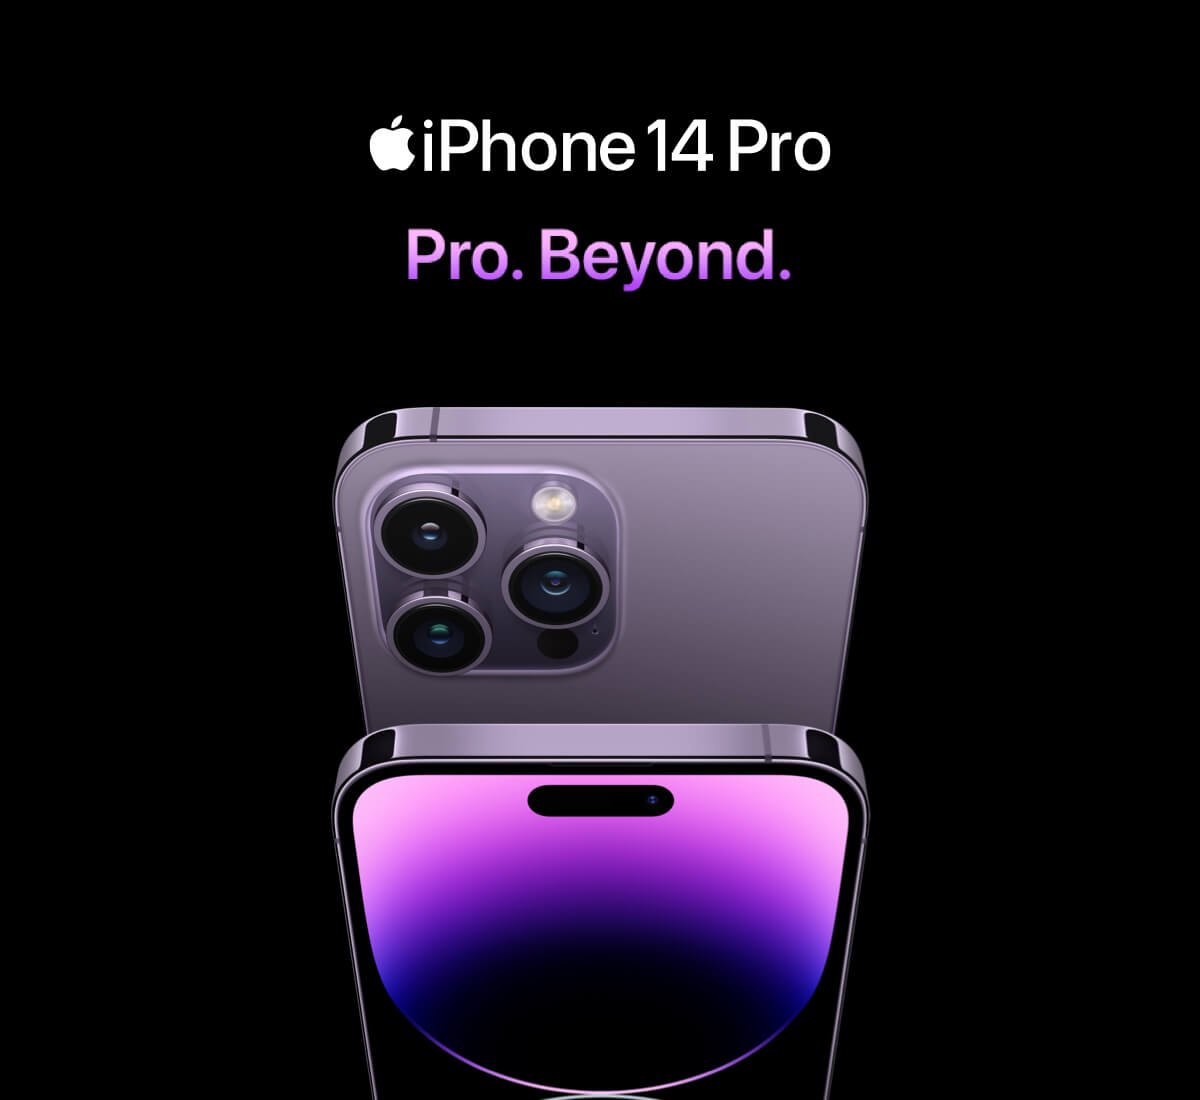 image of 2 iPhone 14 Pros – one facing the front so we can see its purple display, the other sits above and faces backwards so we can see its rear camera system. Both are tilted forwards so we can see the curved edges of the phones.